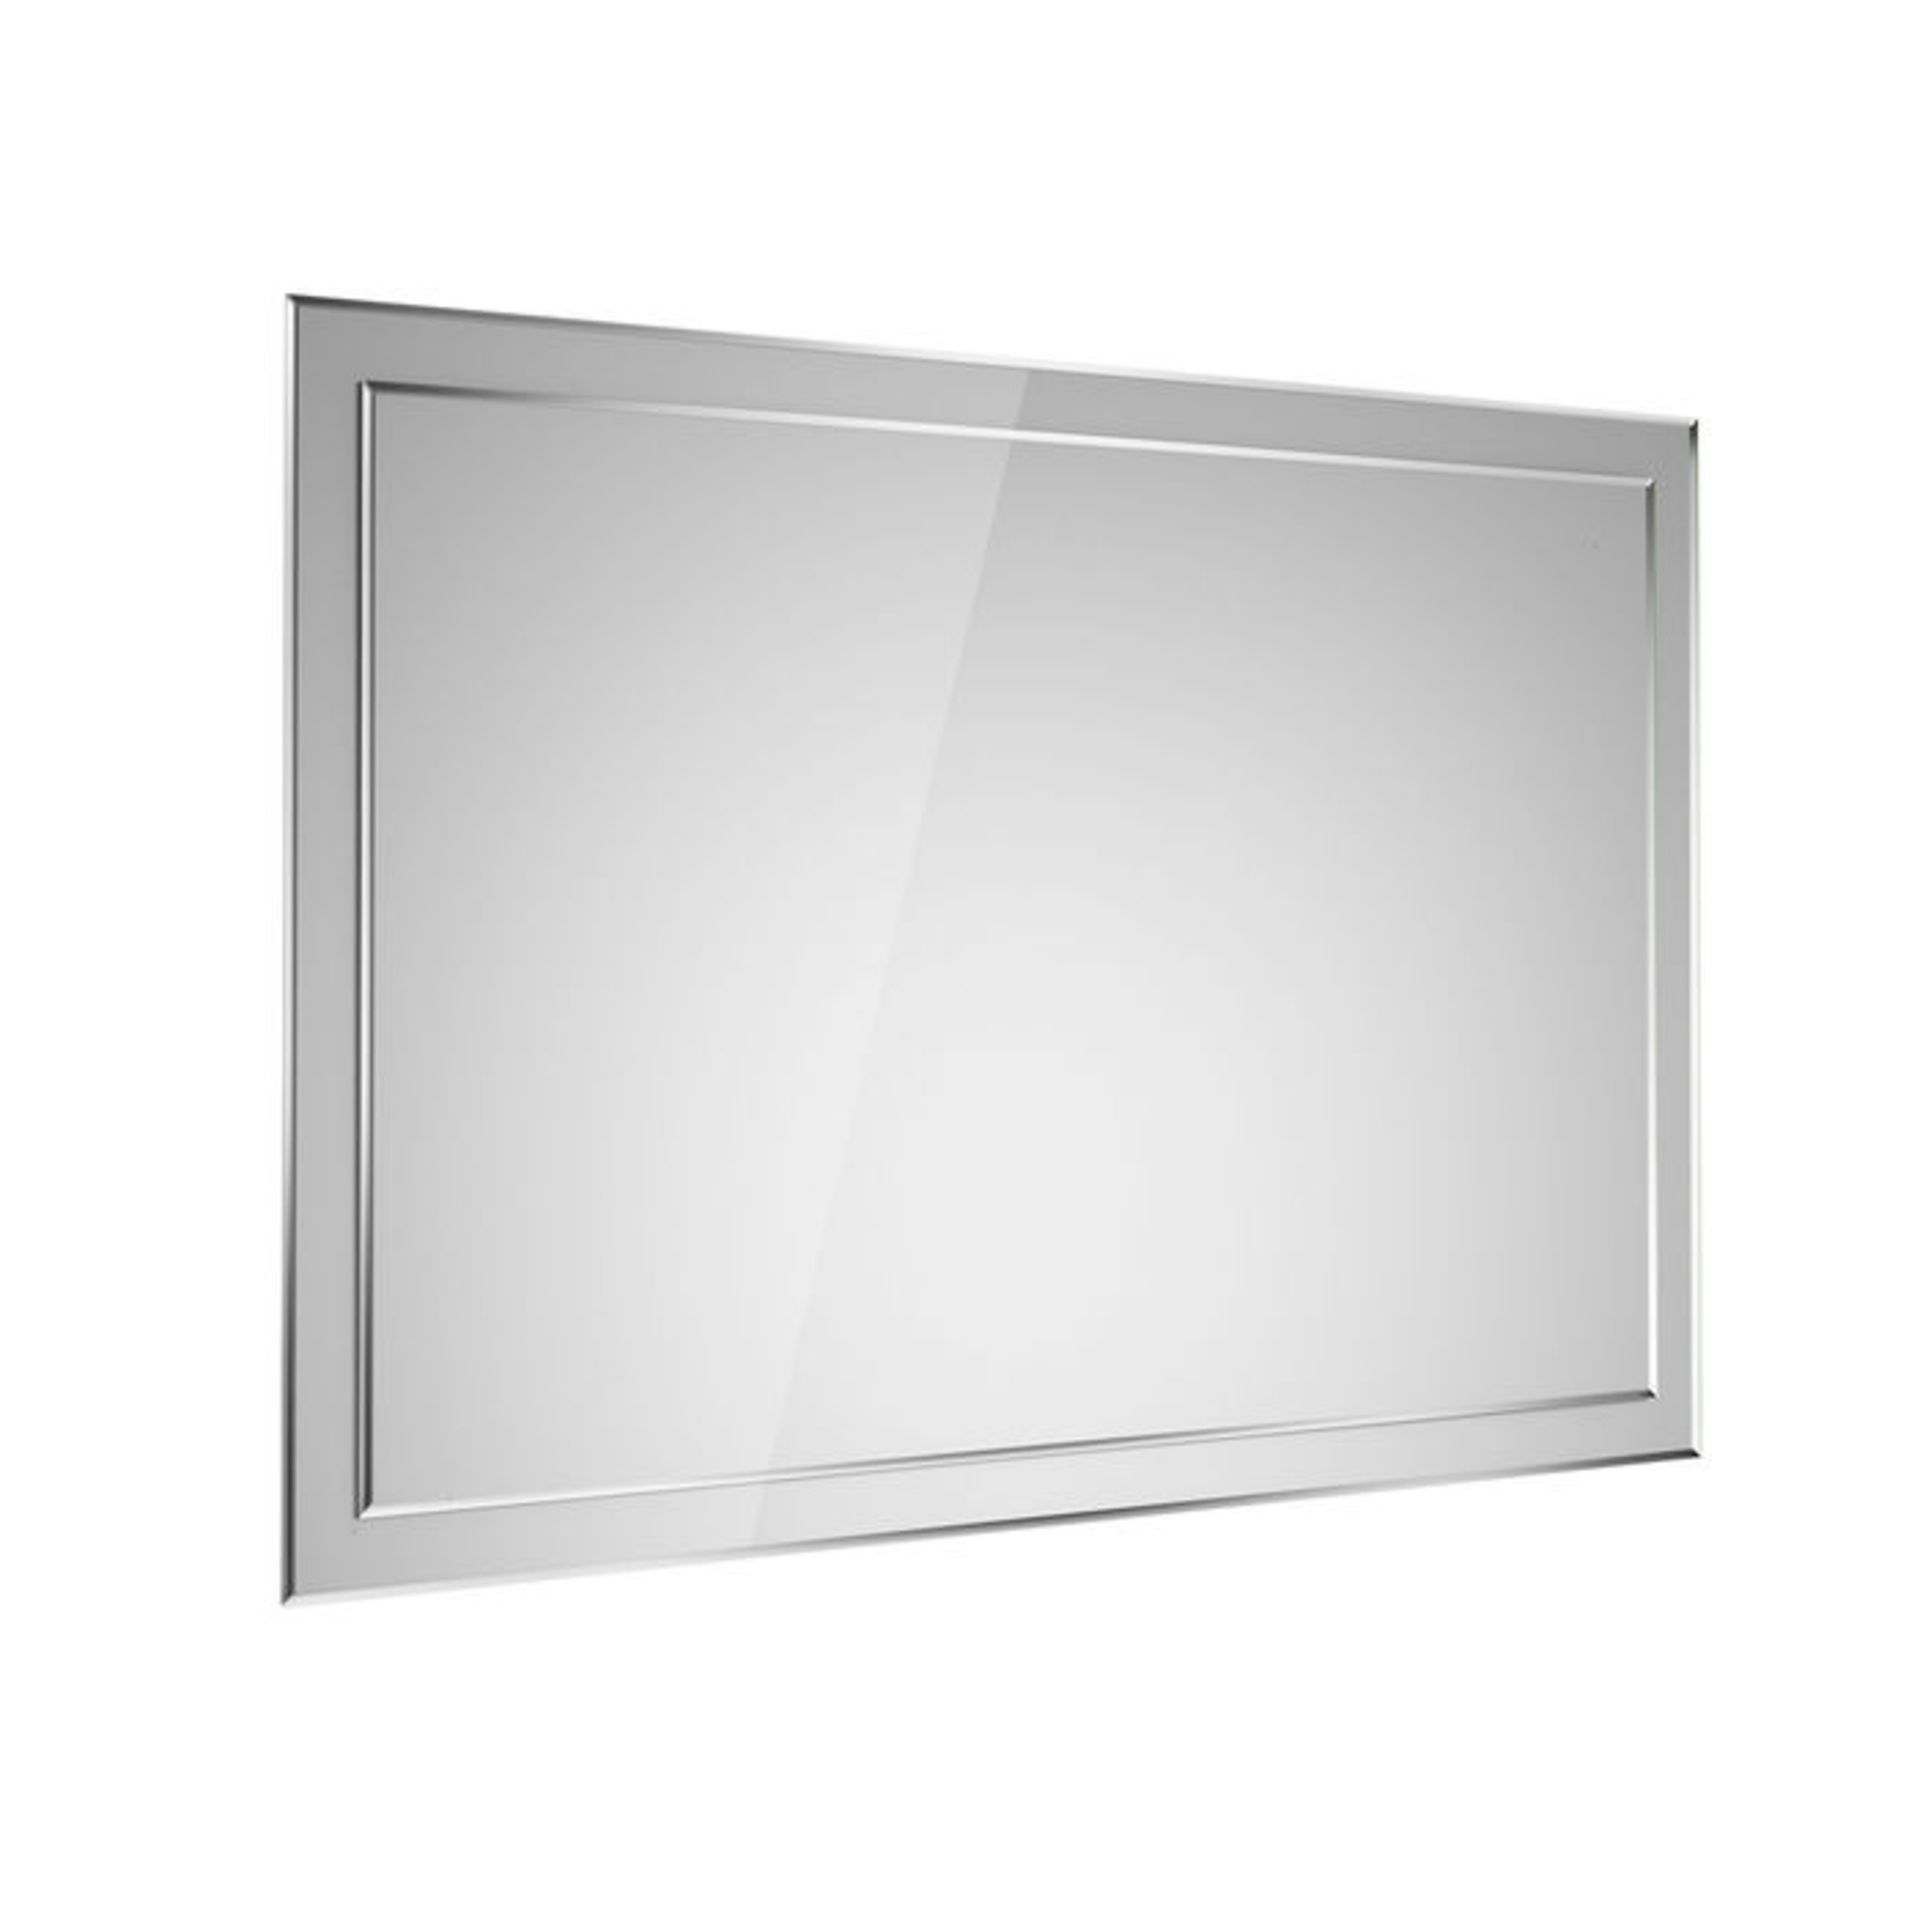 (LP79) 800x1200mm Bevel Mirror. Smooth beveled edge for additional safety and style Supplied fully - Image 5 of 5